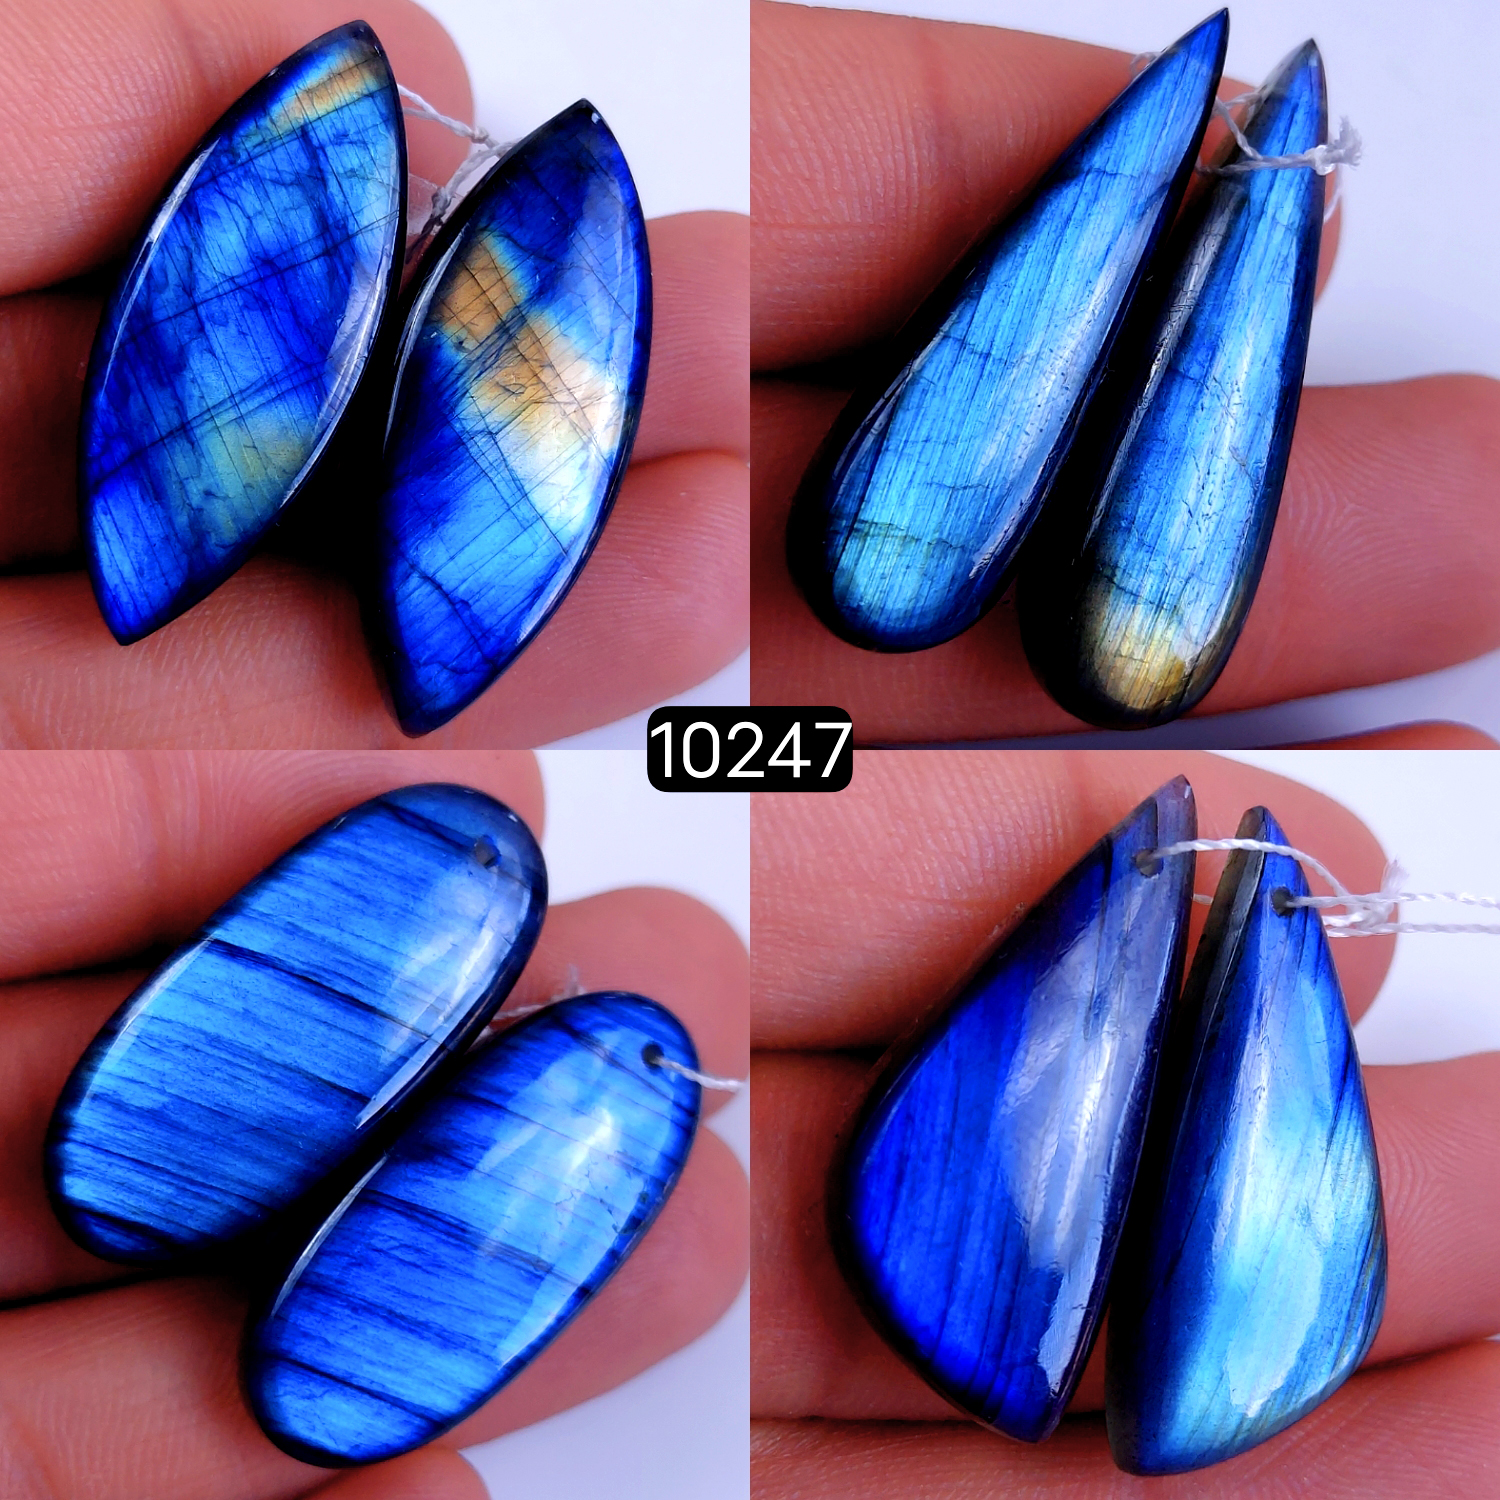 4Pair 180Cts Natural Labradorite Crystal Drill Dangle Drop Earring Pairs Silver Earrings Blue Labradorite Hoop Jewelry  36x14 32x12mm #10247